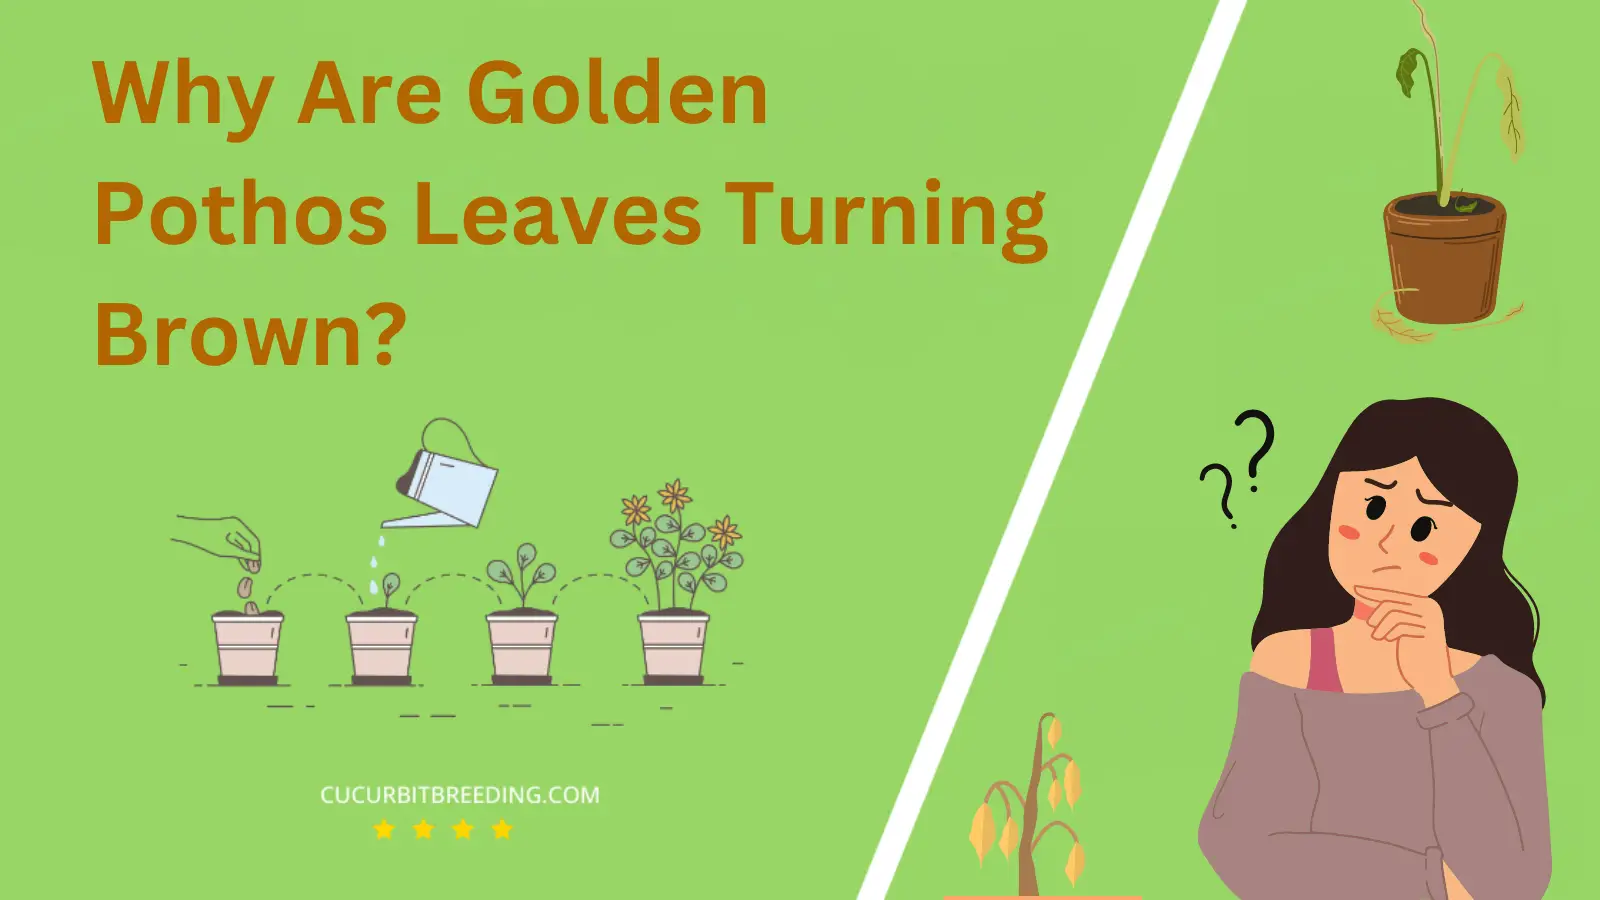 Why Are Golden Pothos Leaves Turning Brown